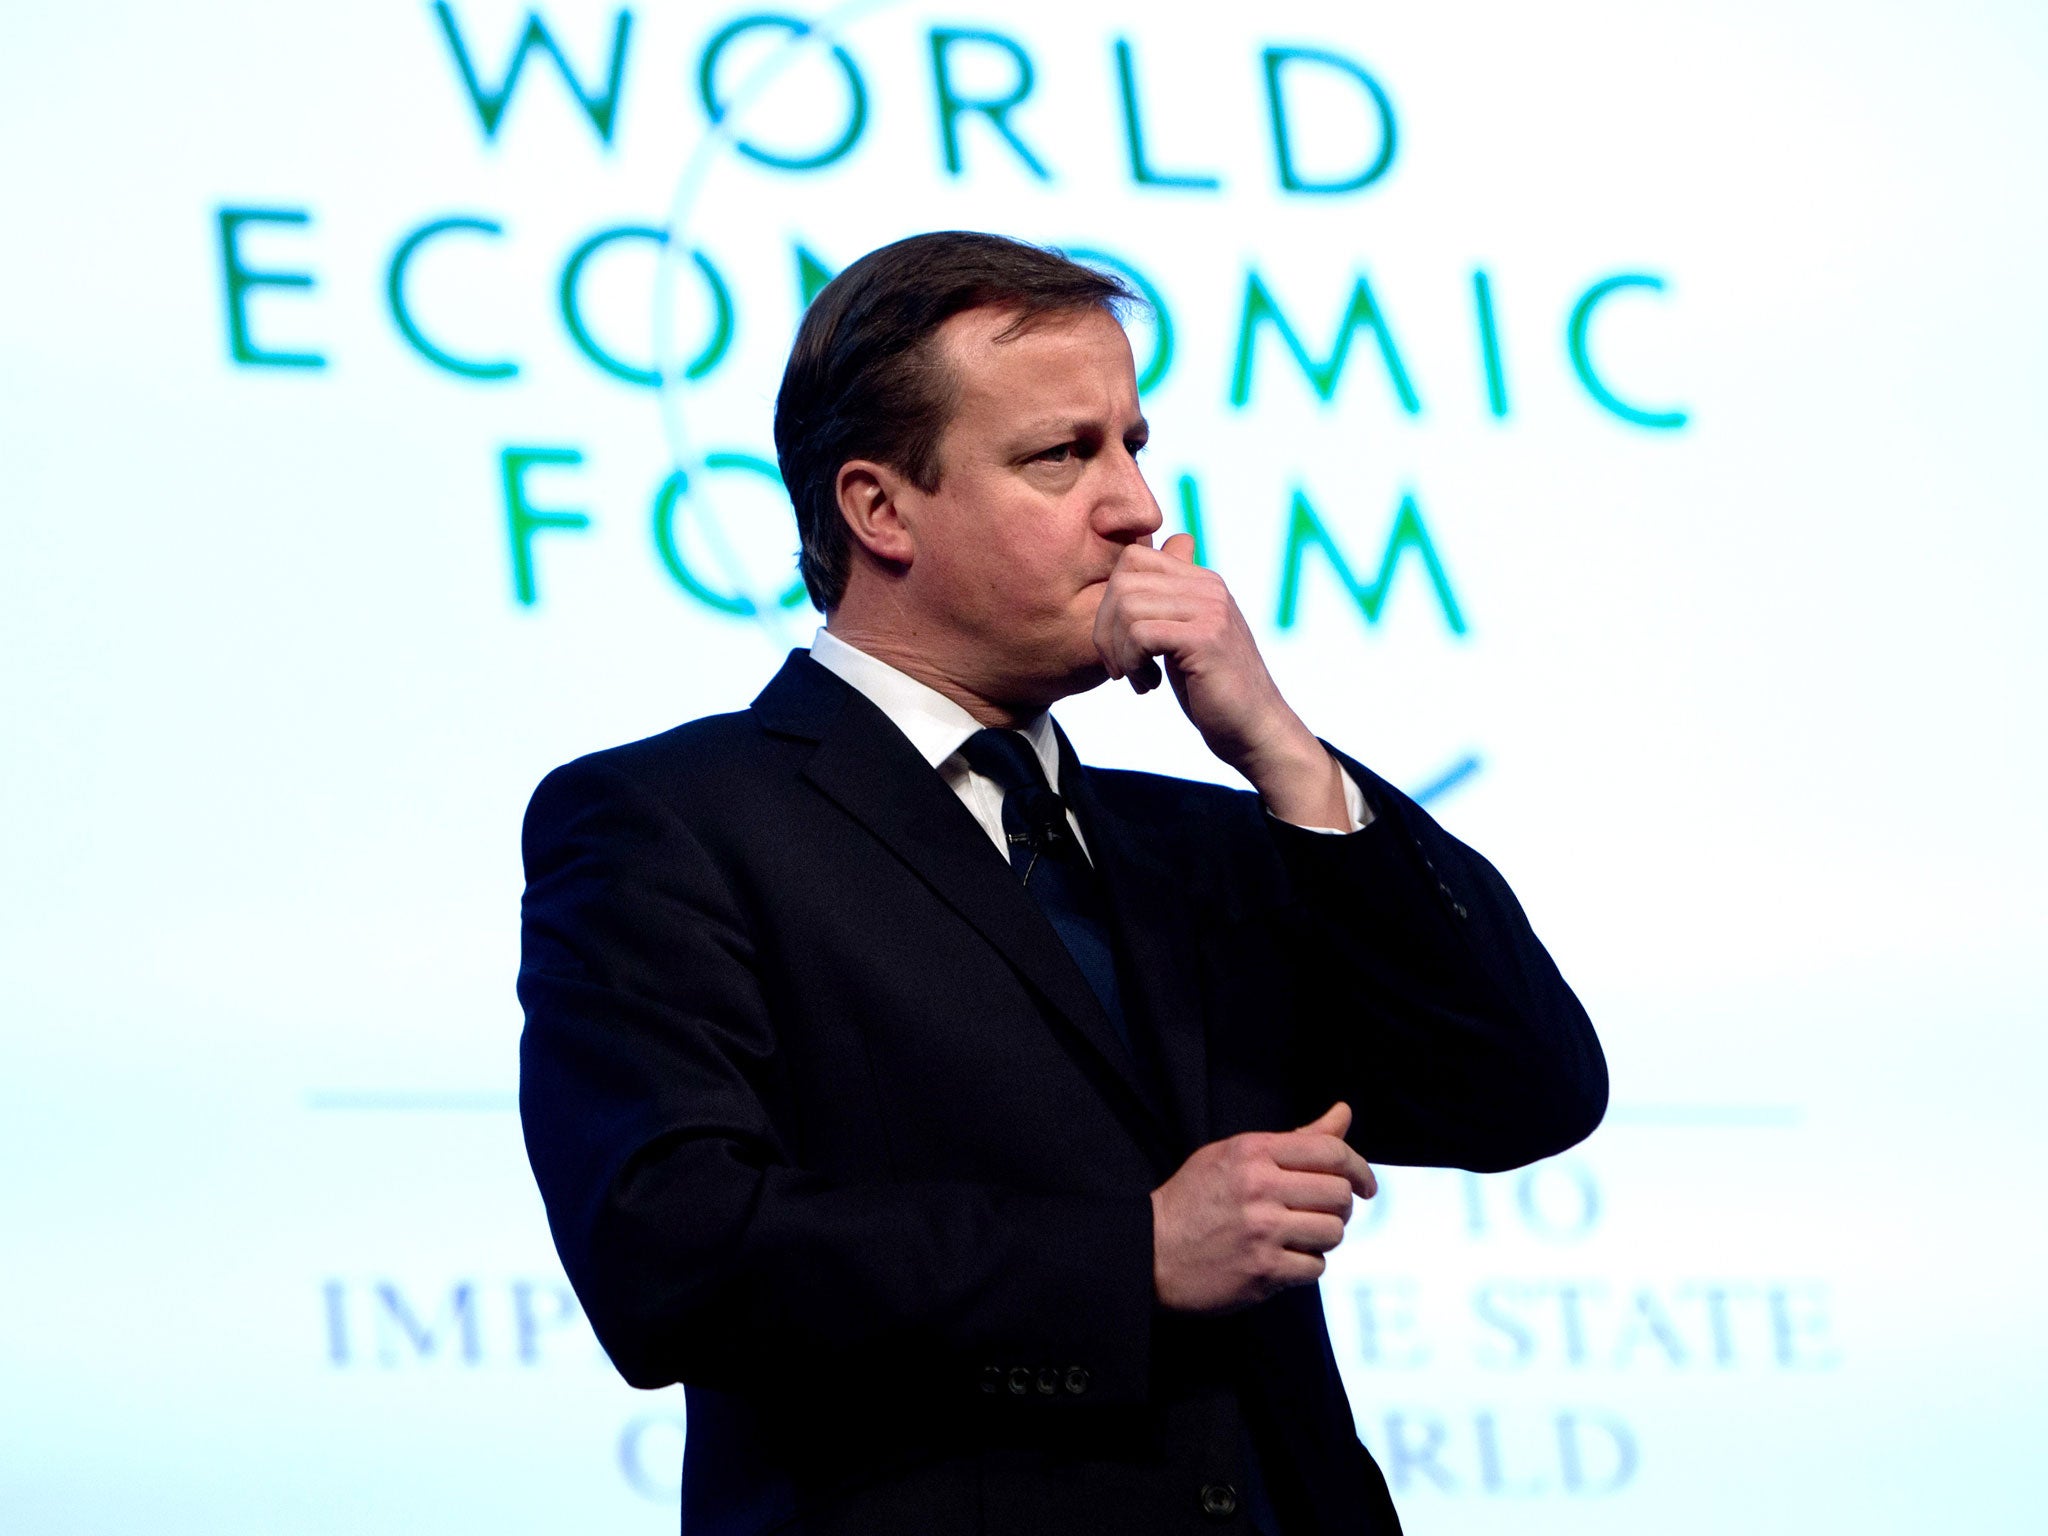 David Cameron addresses a session of the annual World Economic Forum in Davos